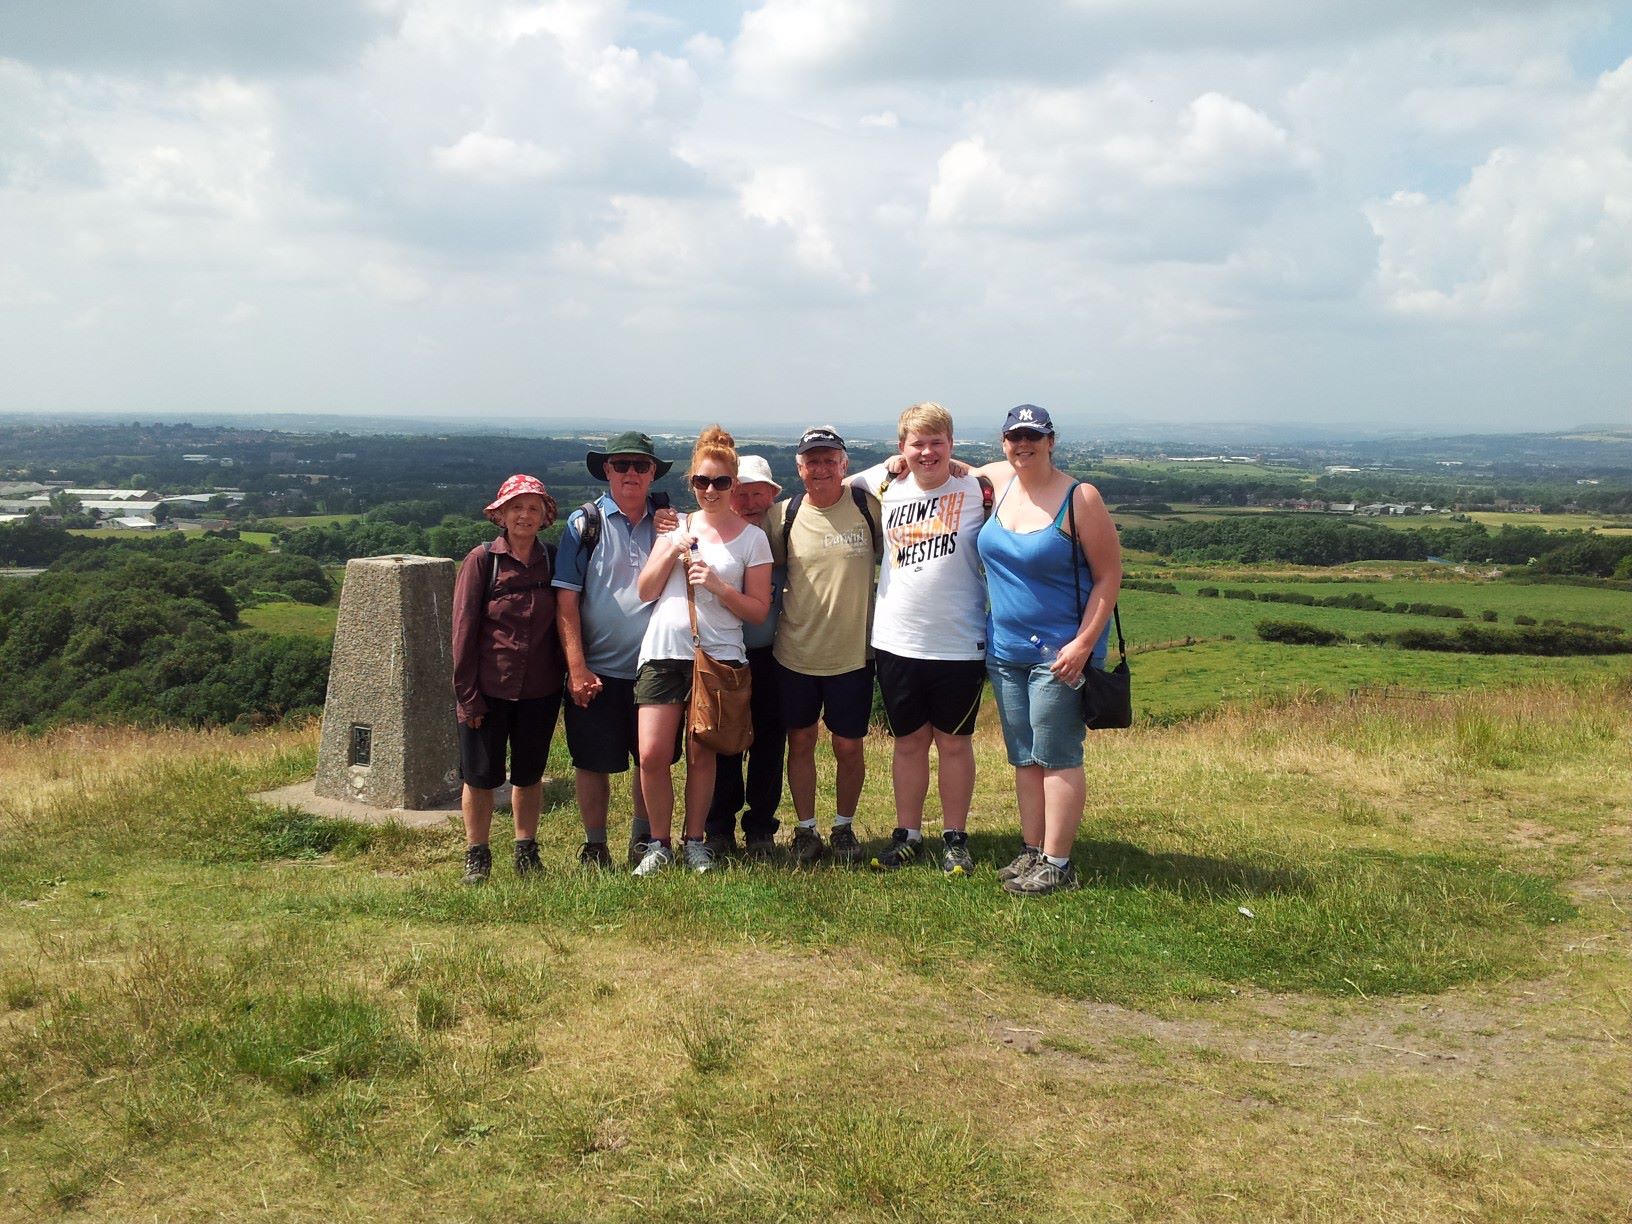 At the monument at Tandle Hills